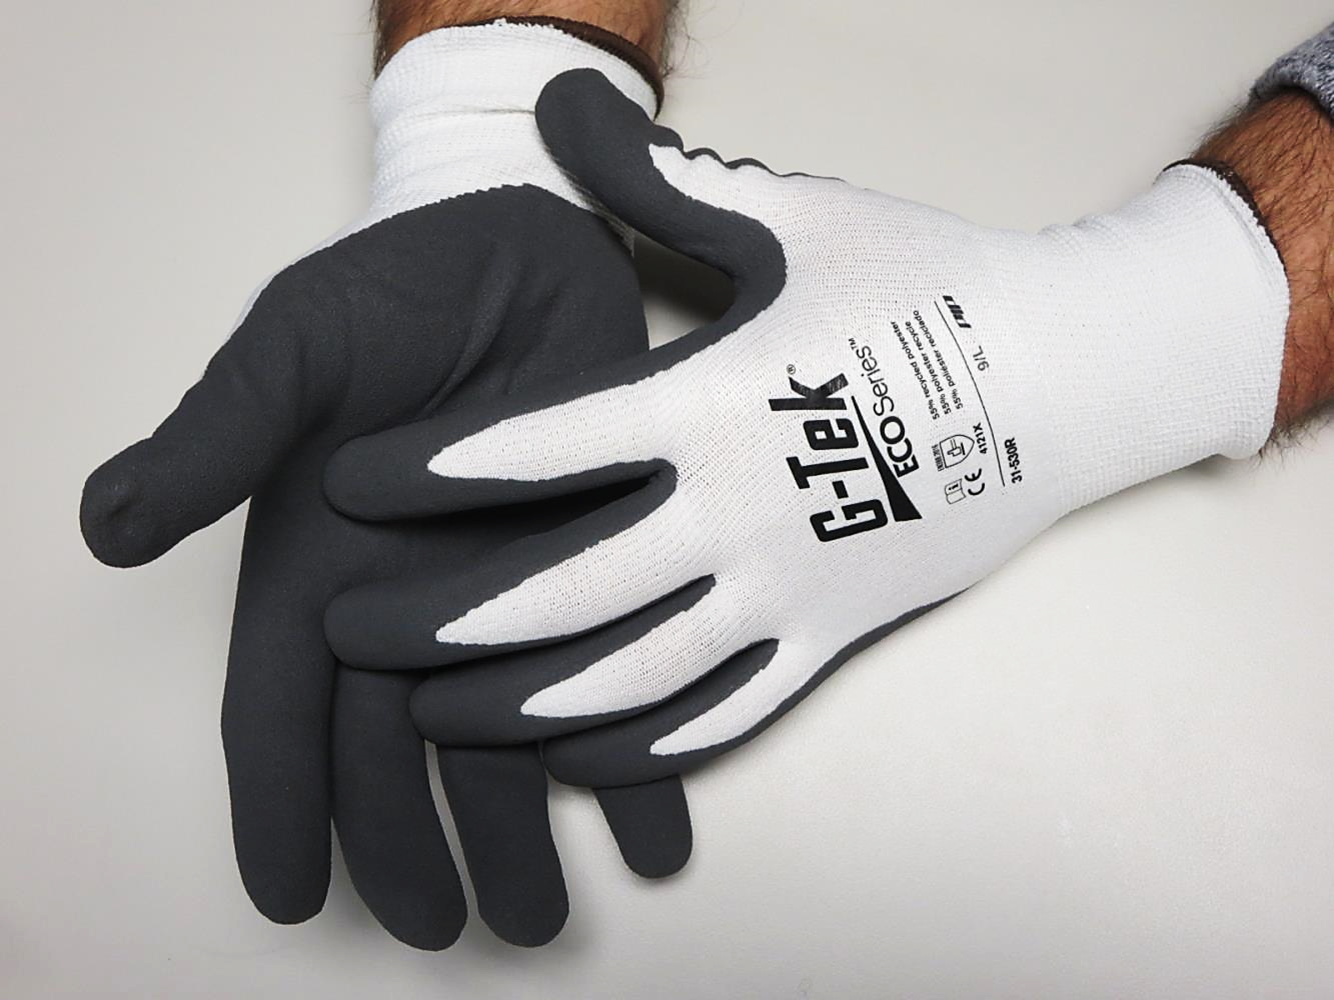 PIP® G-Tek® ECOSeries 31-530R sustainable work gloves with nitrile microsurface palm coating are made bio-based fibers made from recycled P.E.T. water bottles